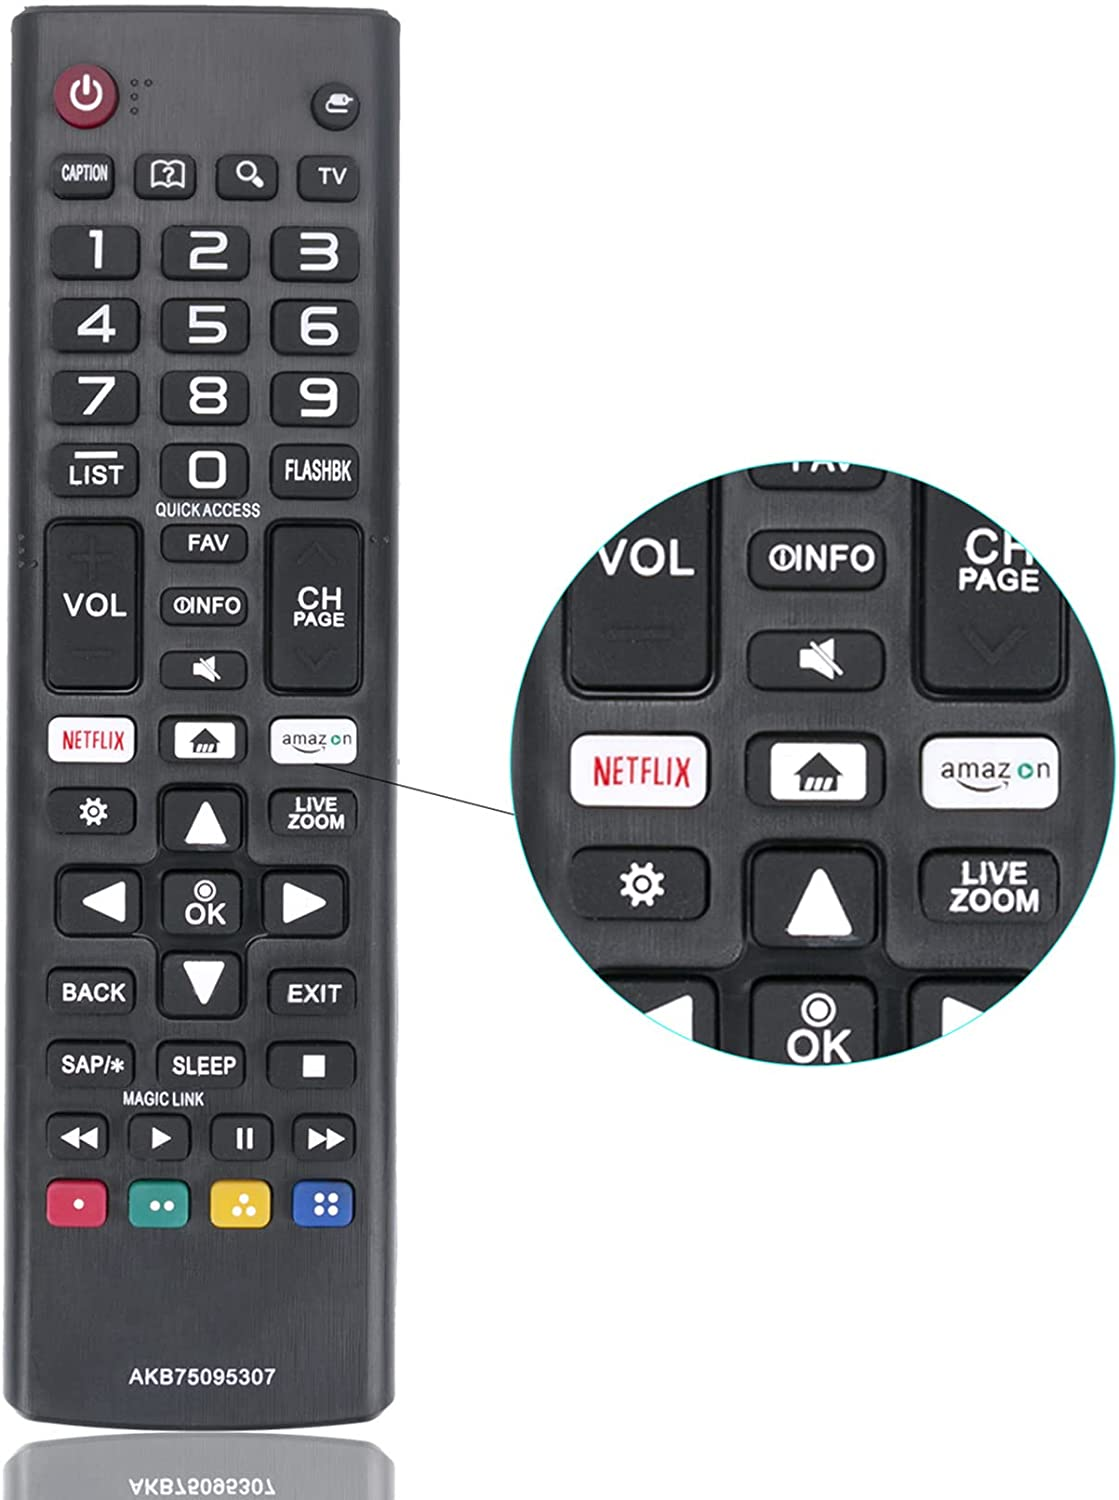 AKB75095307 Remote Control Replacement Fit for LG LED LCD TV 43UJ6500 43UJ6560 49UJ6500 49UJ6560 55UJ6520 55UJ6540 55UJ6580 60UJ6540 24Lm520D 24LM520S 28Lm520S